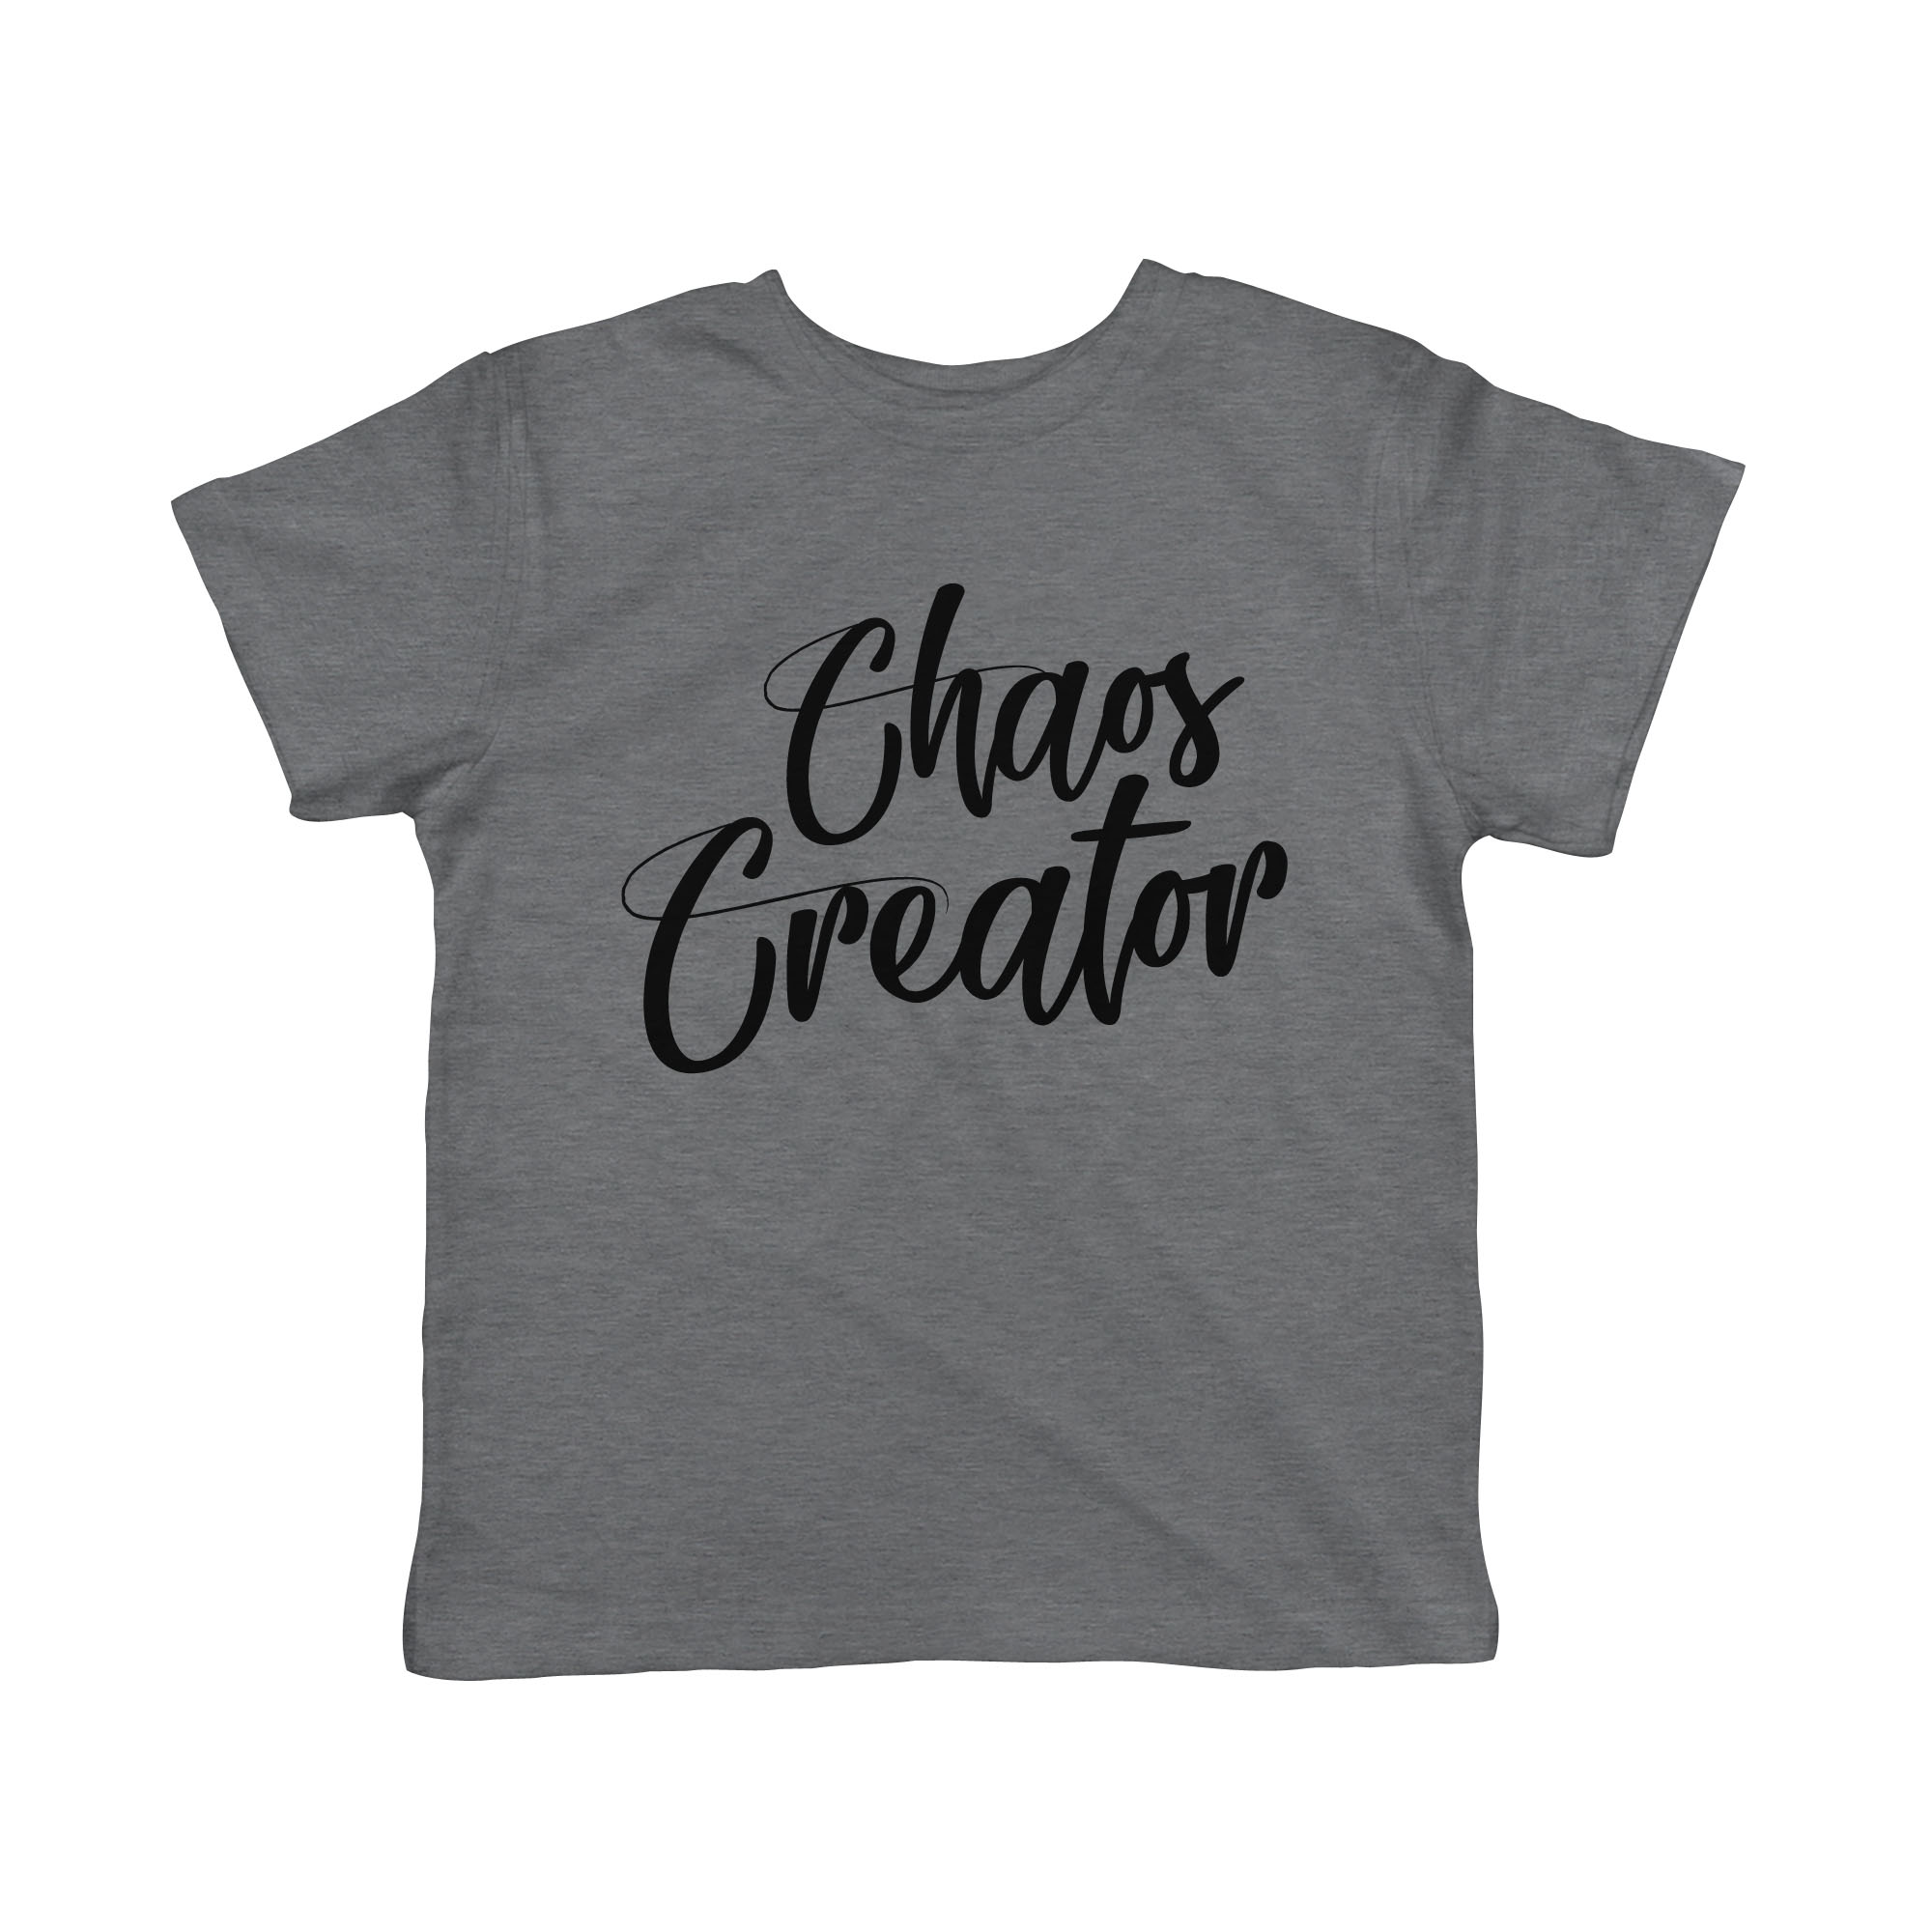 Crazy Dog Tshirts Toddler Chaos Creator T Shirt Funny Trouble Maker Baby Infant T Shirt Kids Gift